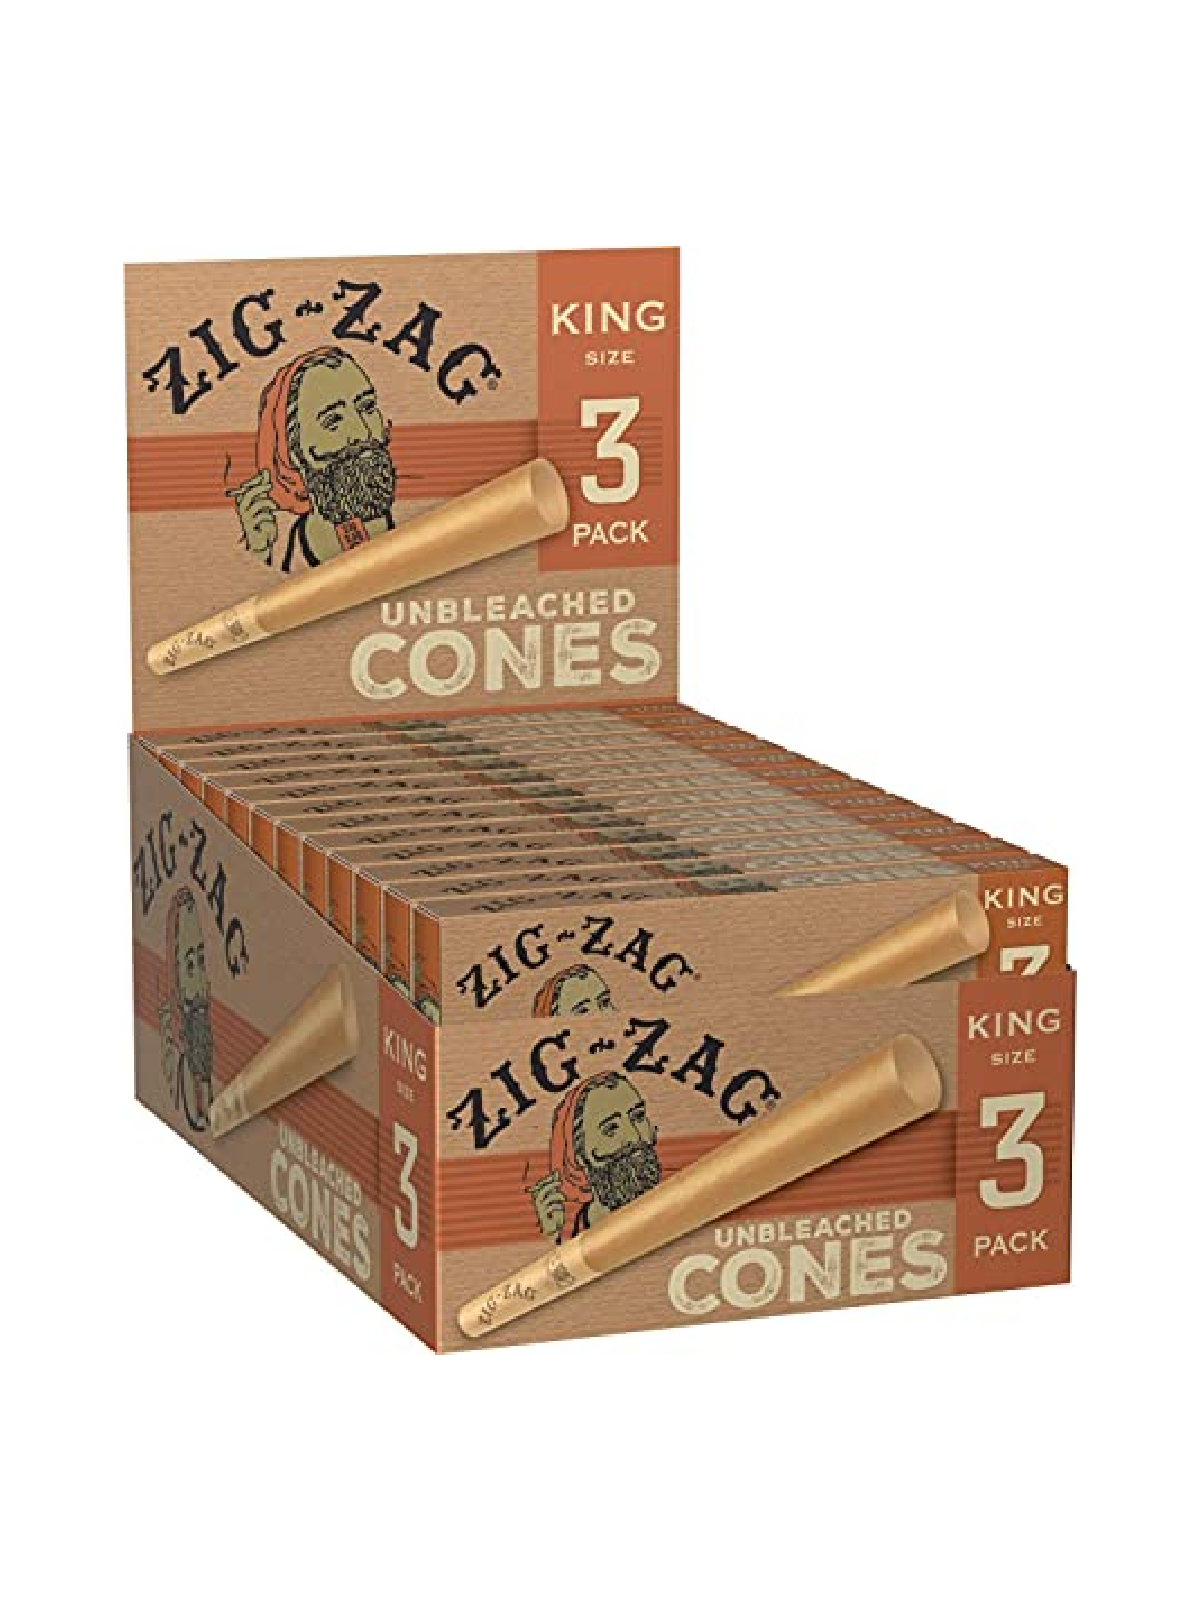 ZIG ZAG CONE UNBLEACHED KING SIZE 3PK 24 CT